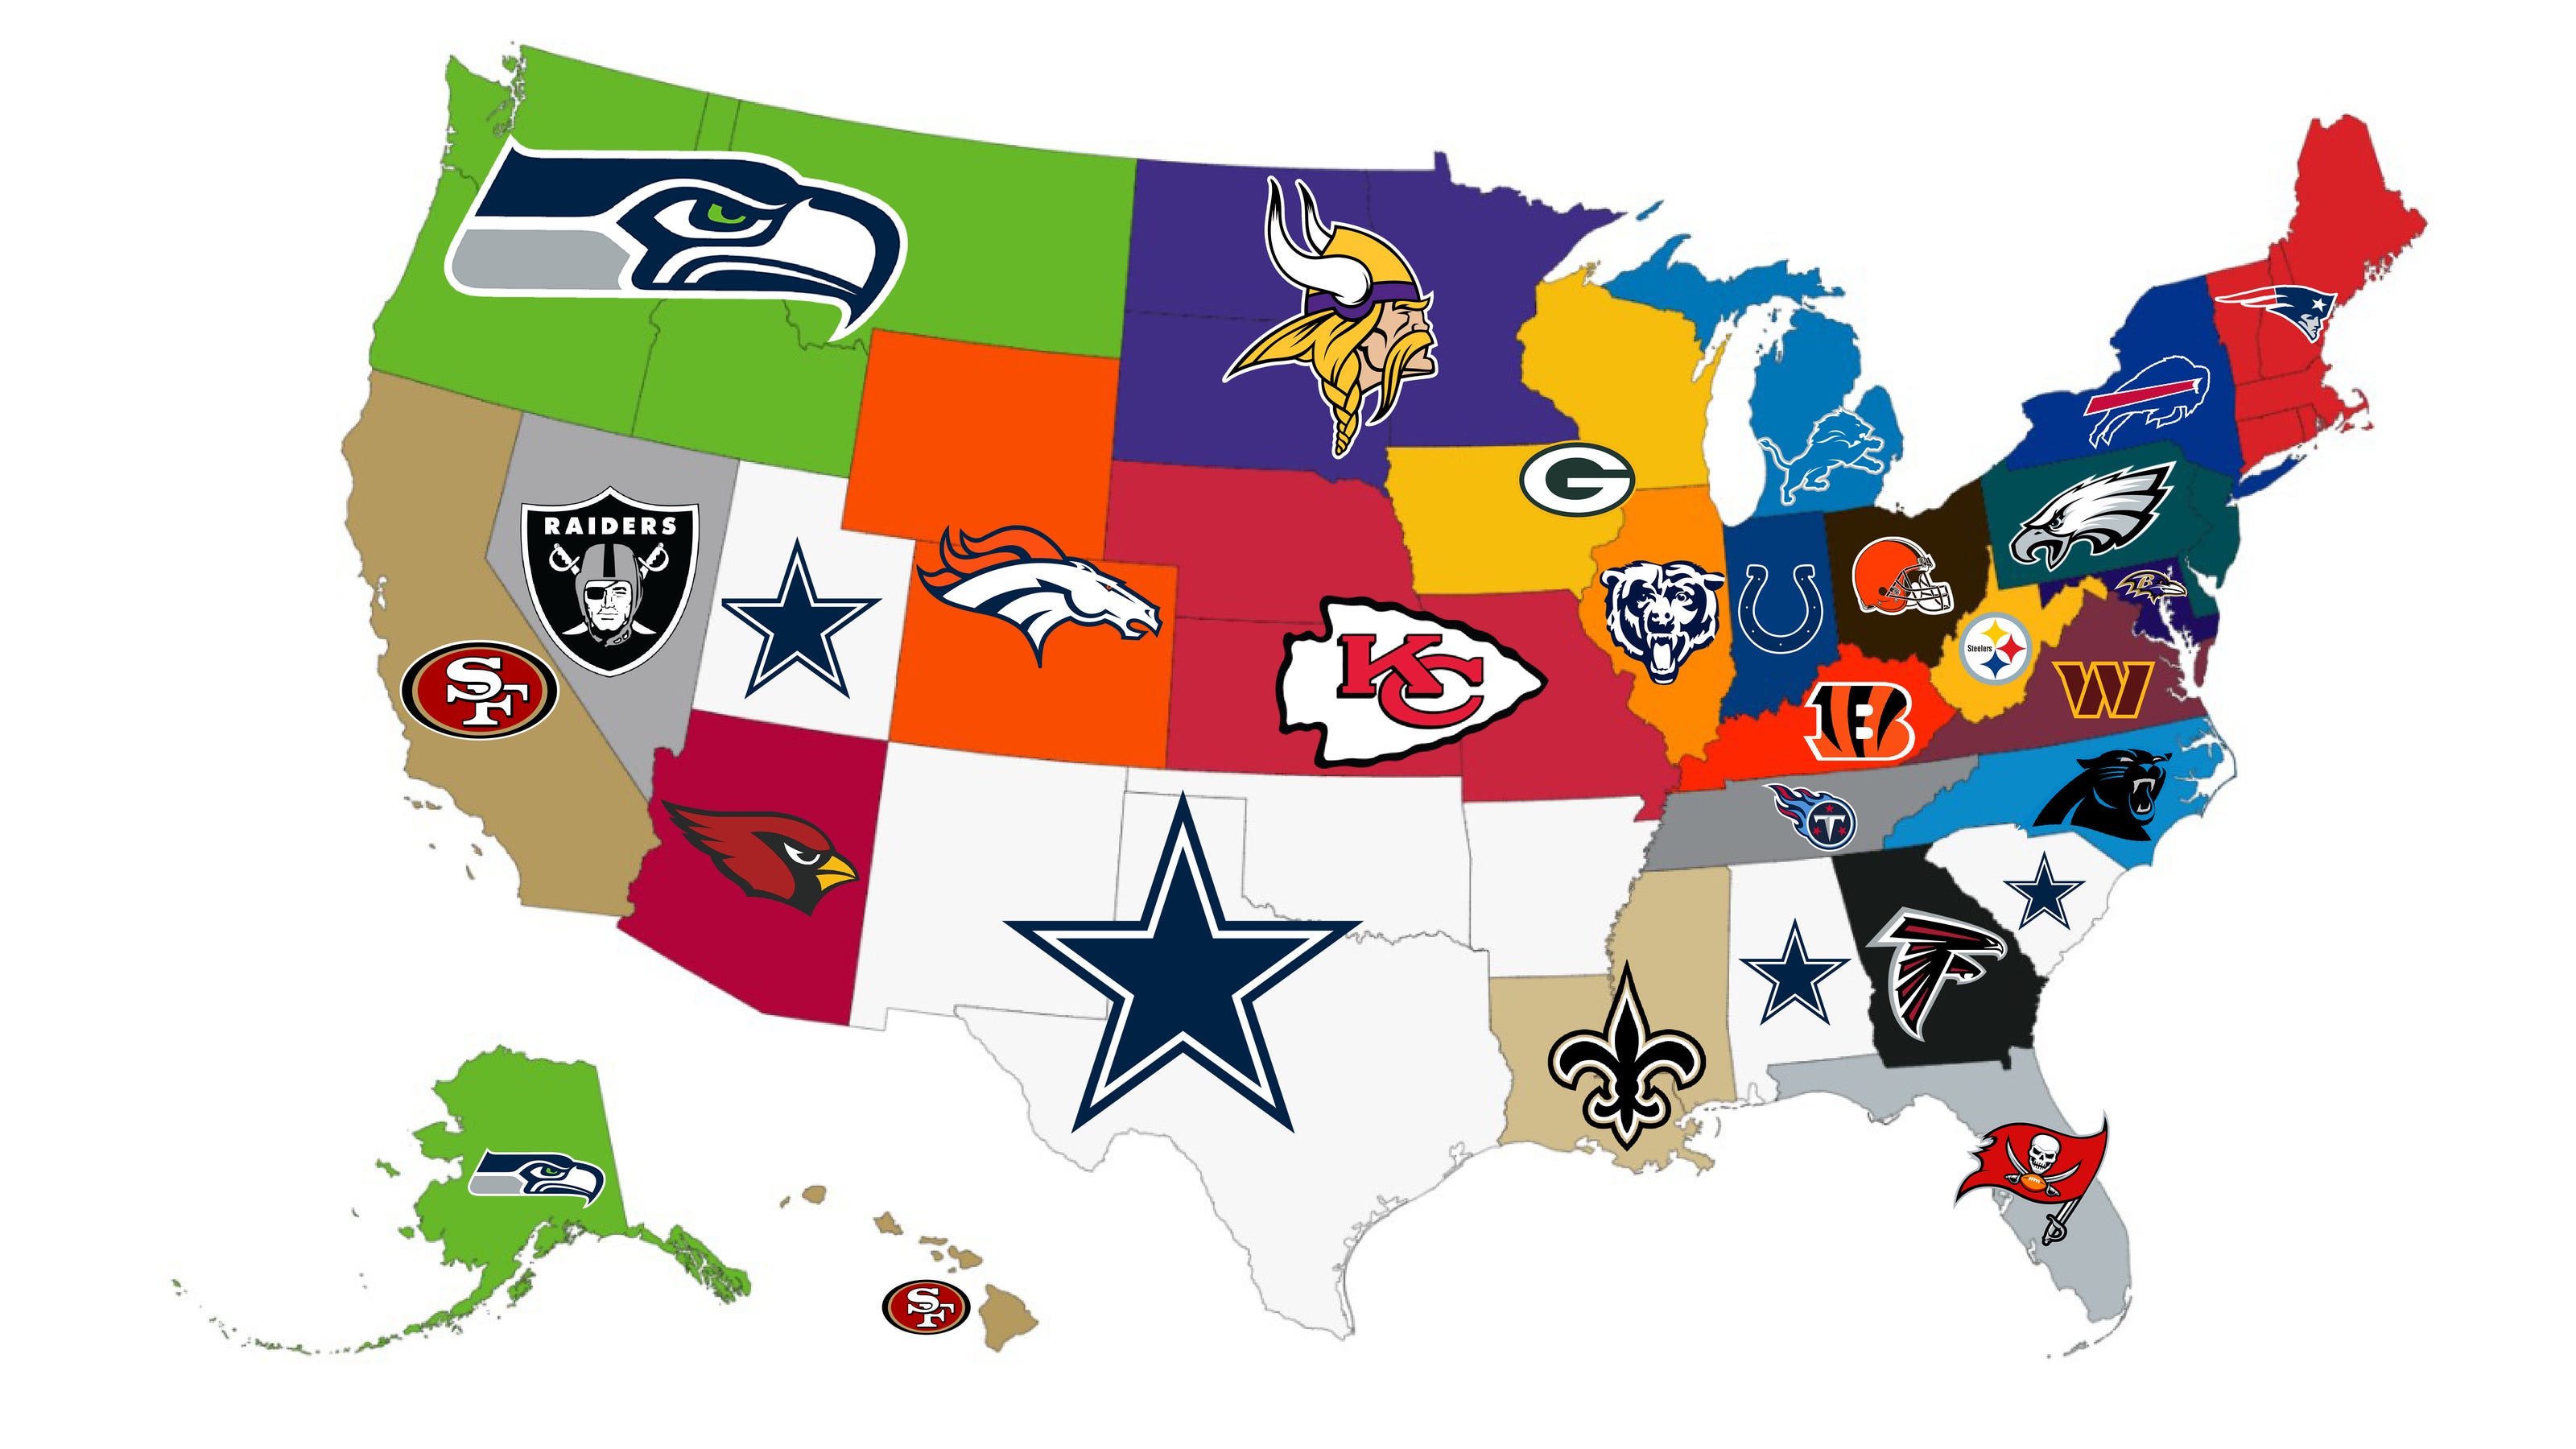 finansiere mytologi ingen Who are the most popular NFL teams? Cowboys lead US in search hits